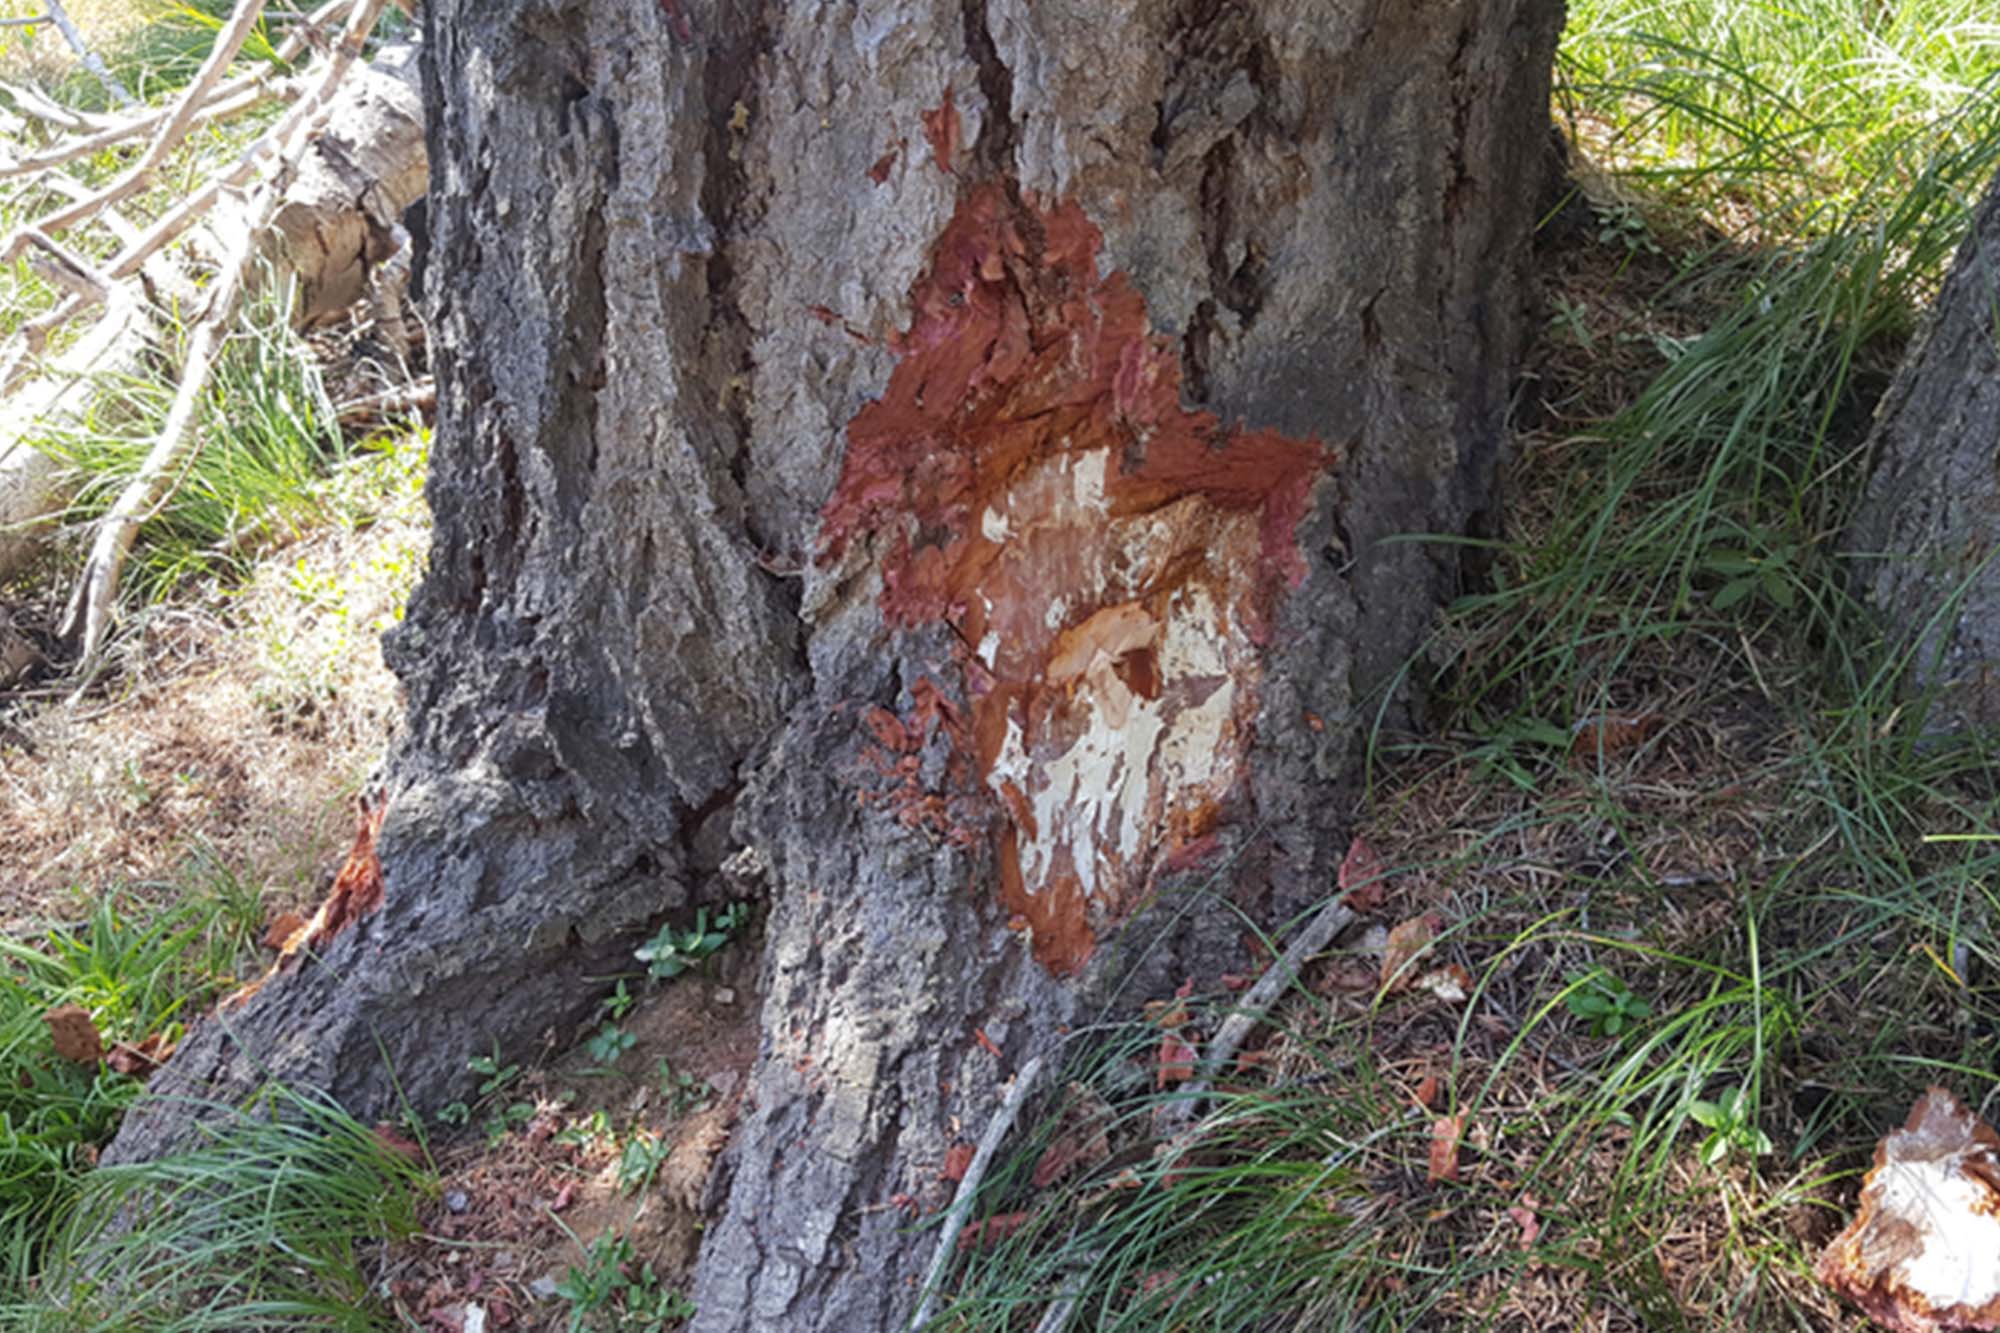 Rare Tree-Killing Fungus Spreads to New York: Thousands of Trees at Risk